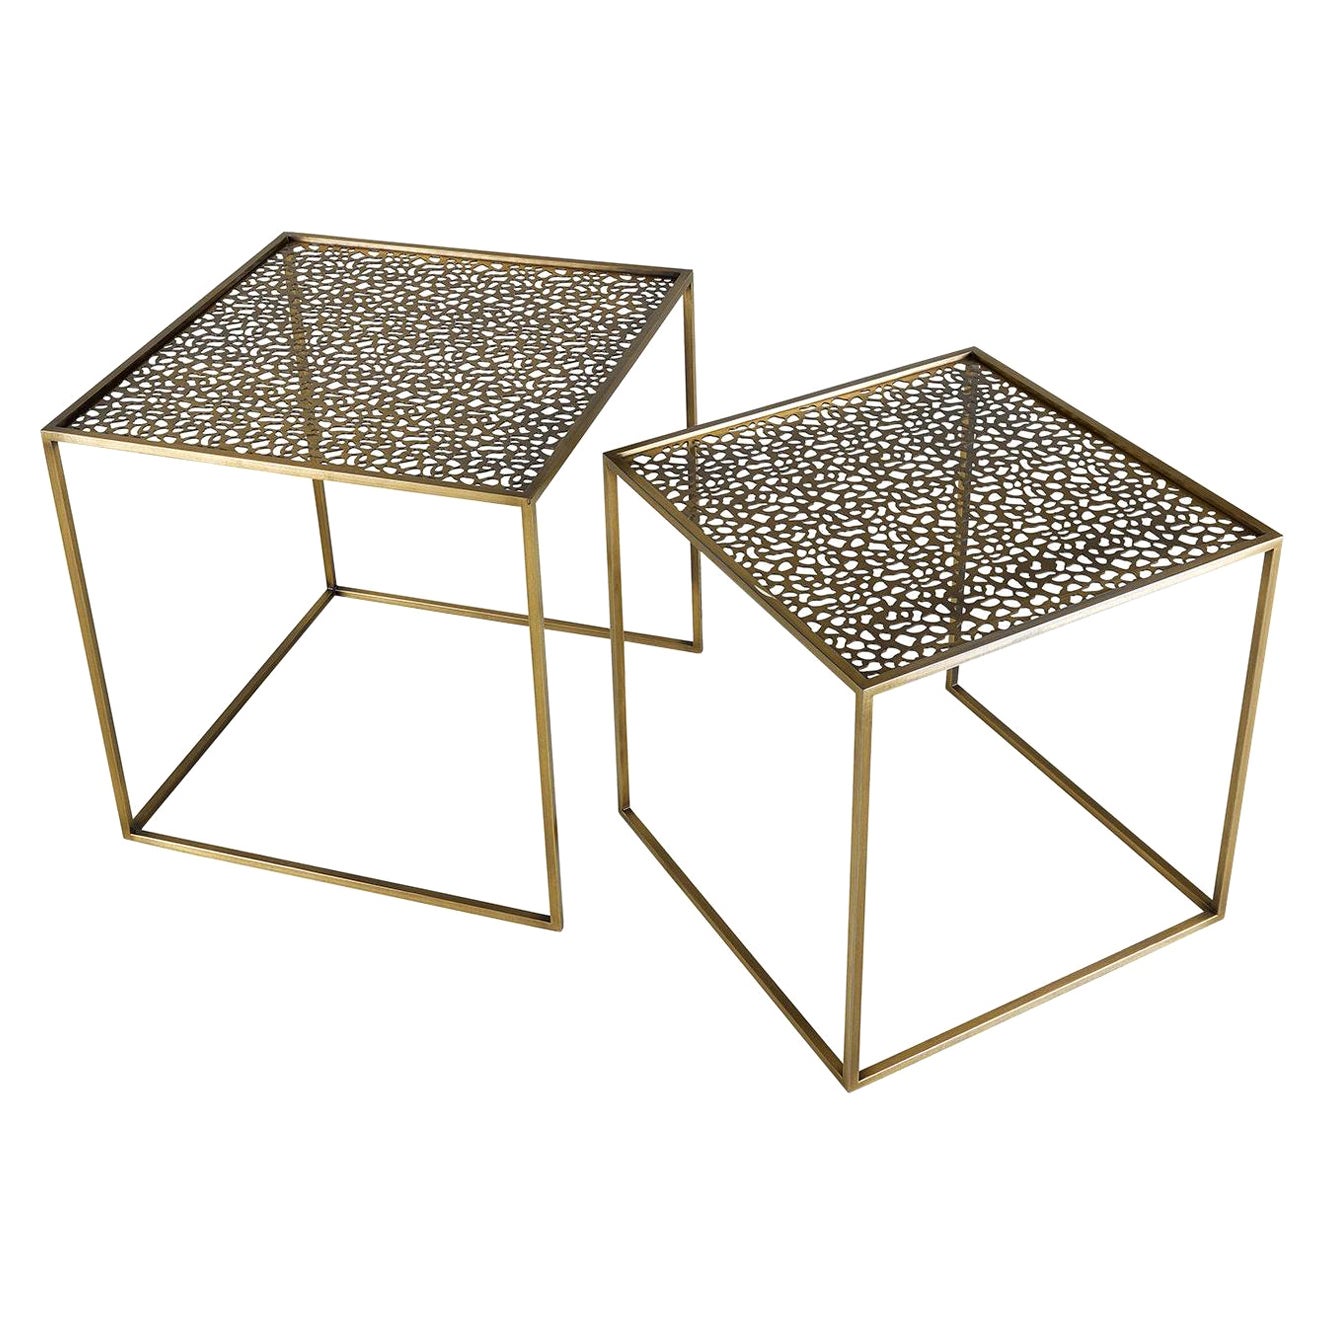 Friends Set of 2 Nesting Tables with Perforated Top For Sale